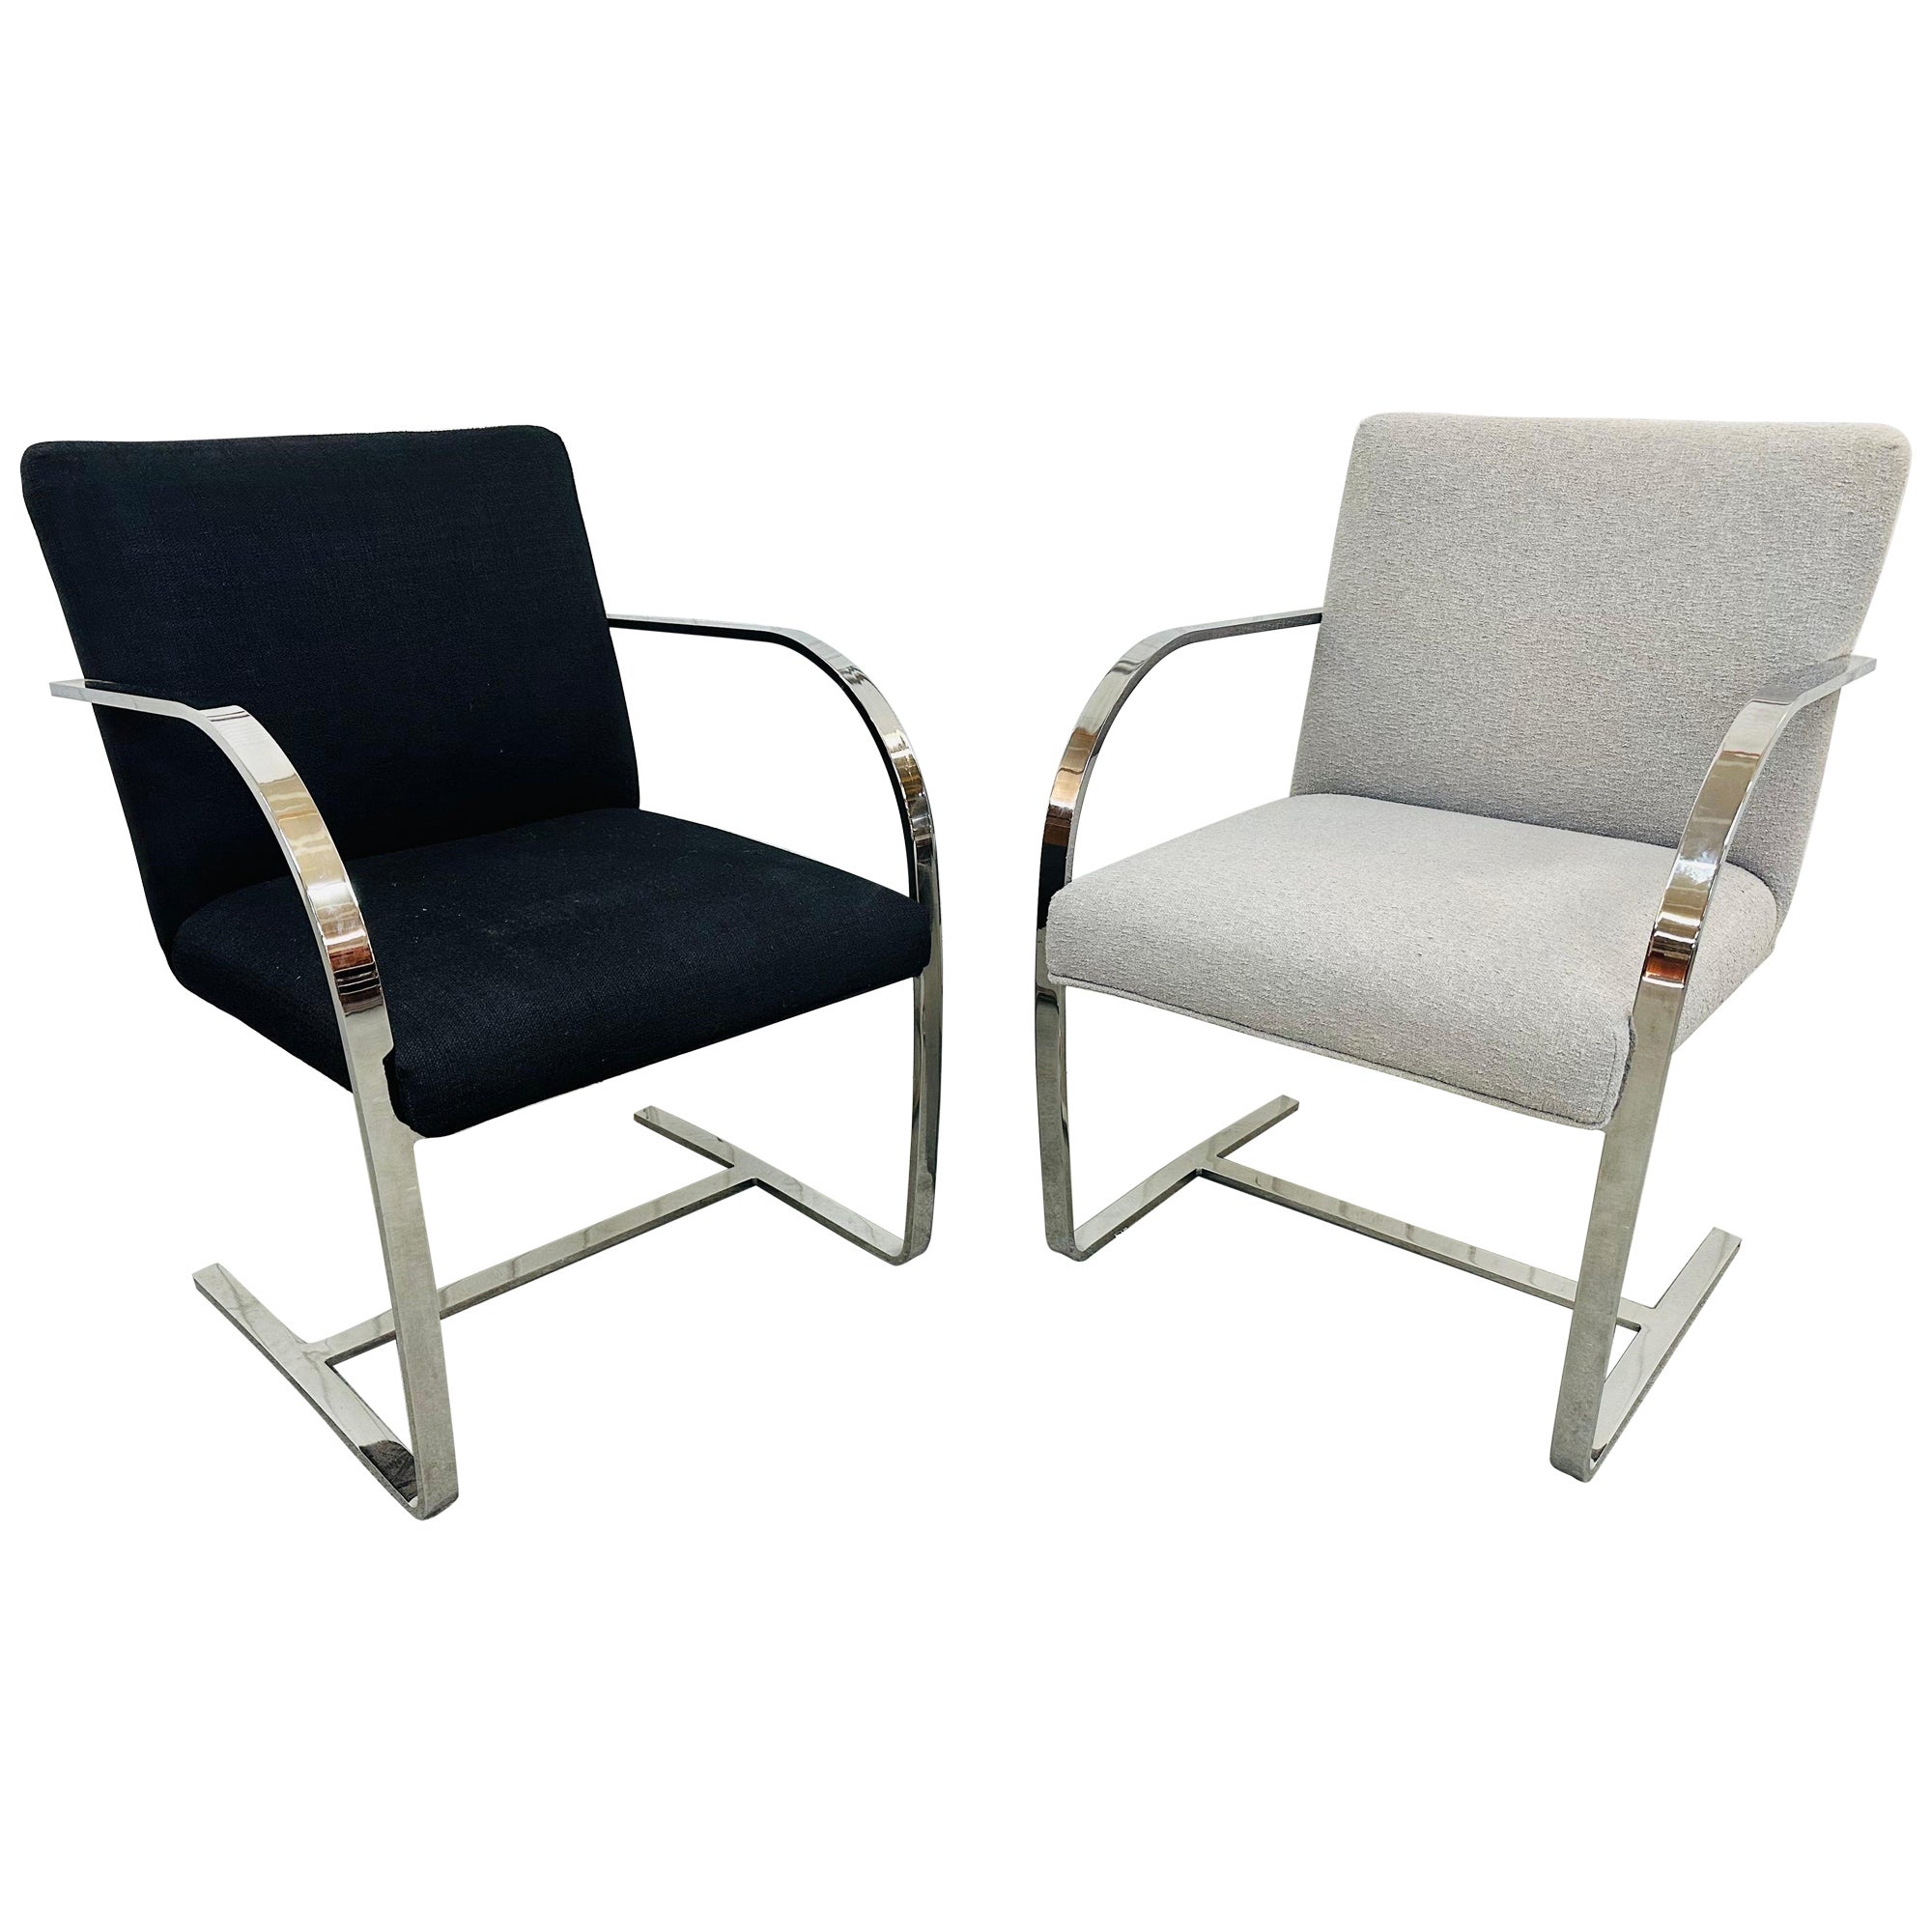 Vintage Modern Bruno Chrome Arm Chairs - Set of 2 For Sale